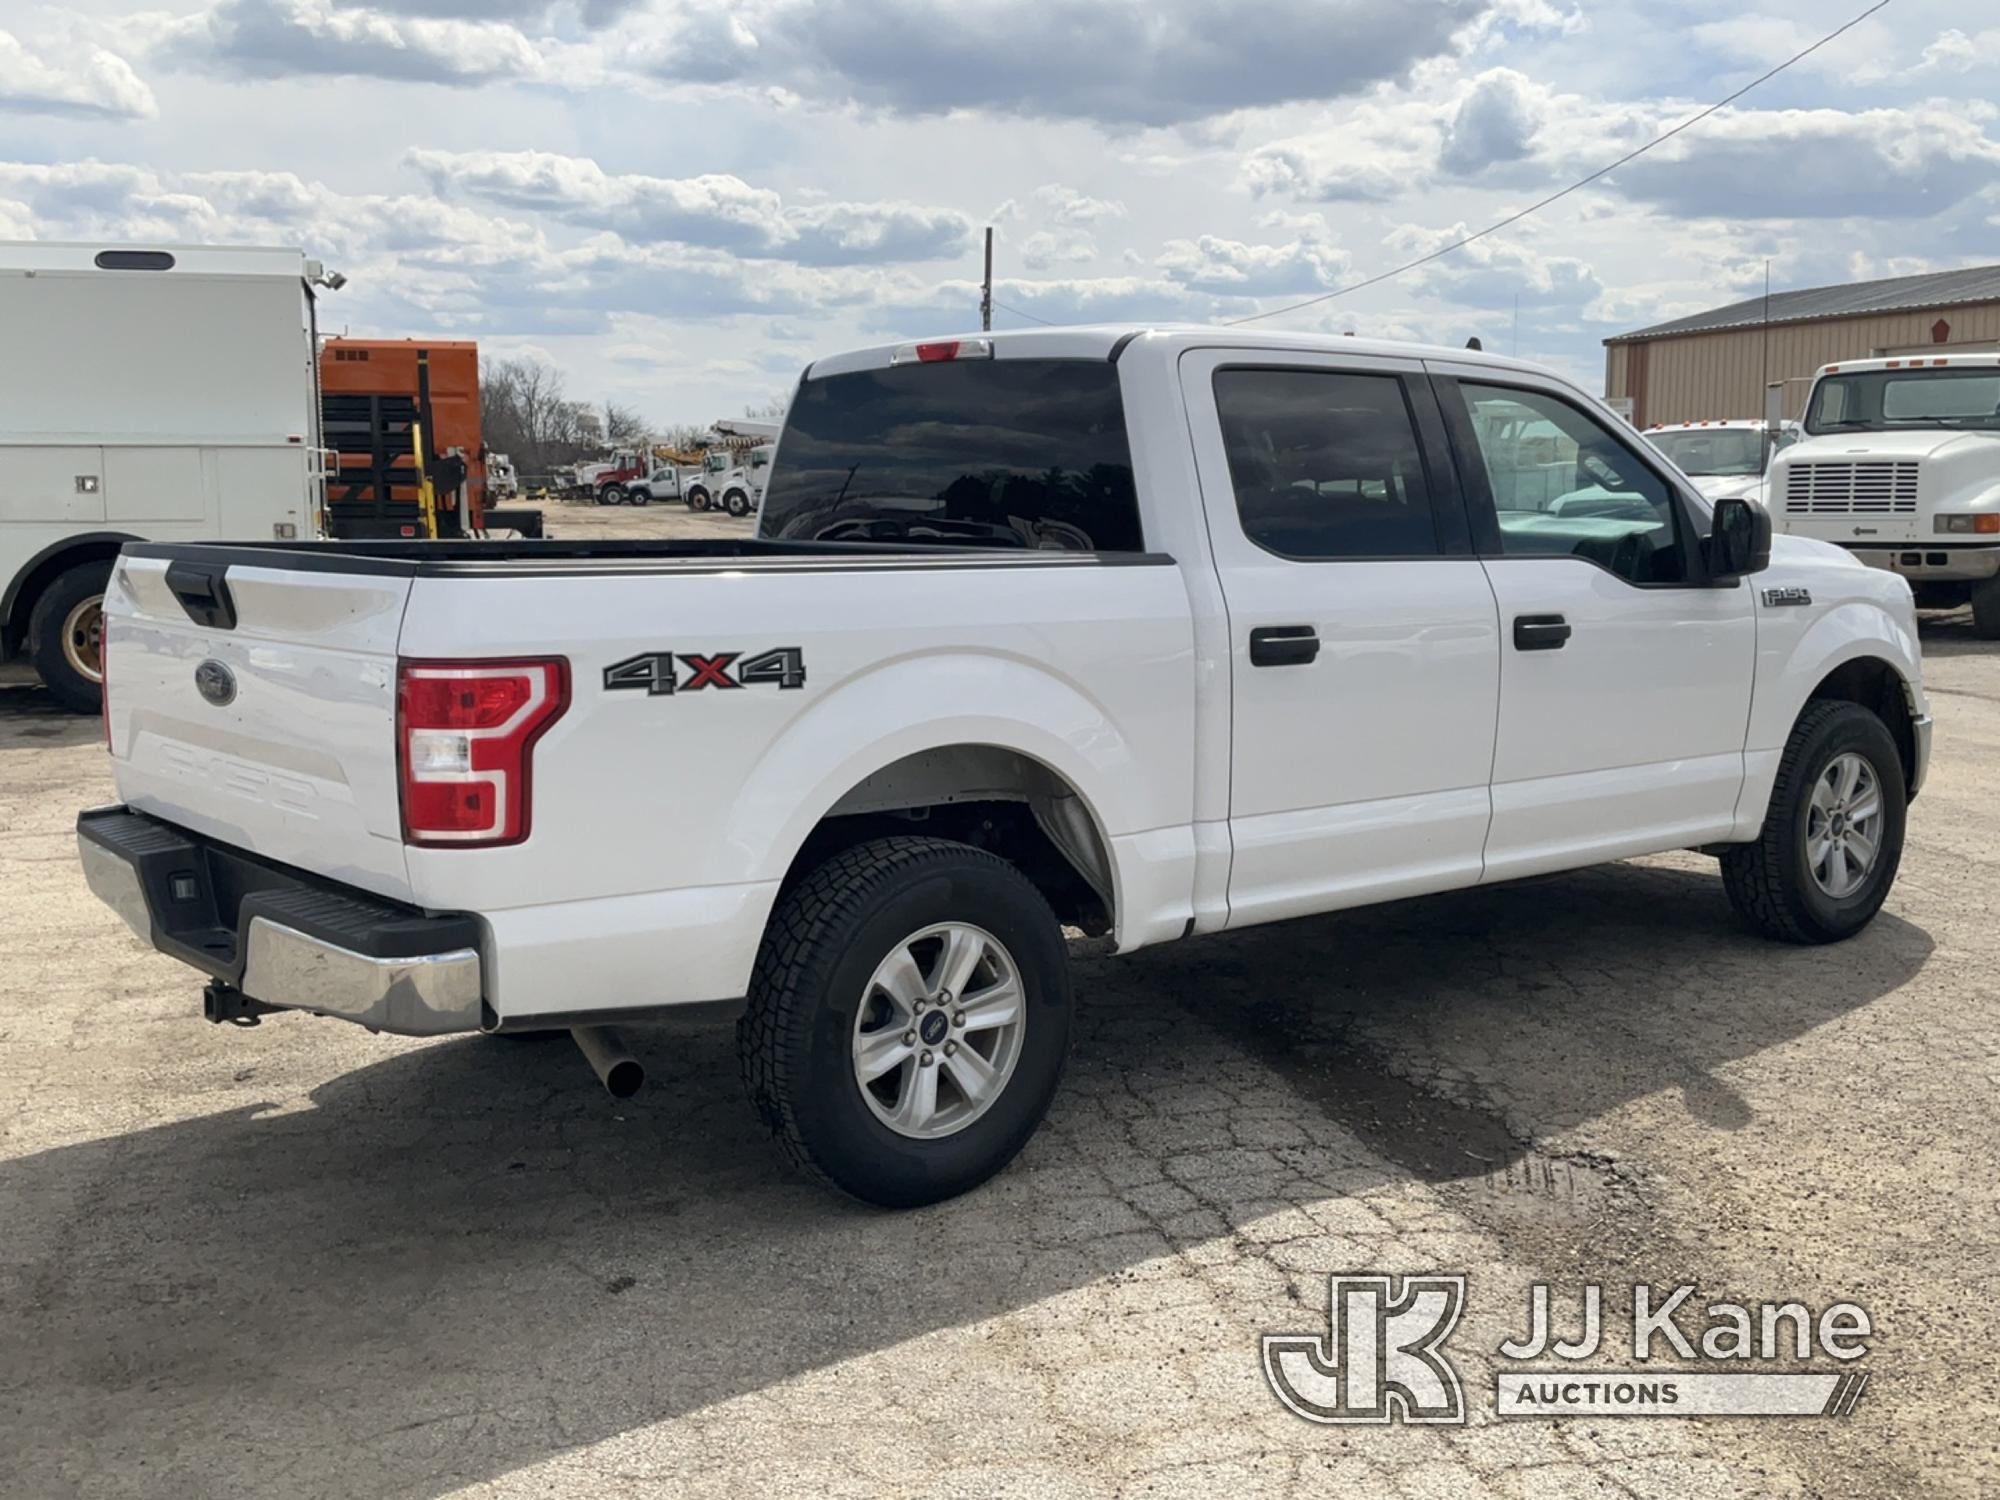 (South Beloit, IL) 2020 Ford F150 4x4 Crew-Cab Pickup Truck Runs, Moves, Check Engine Light On